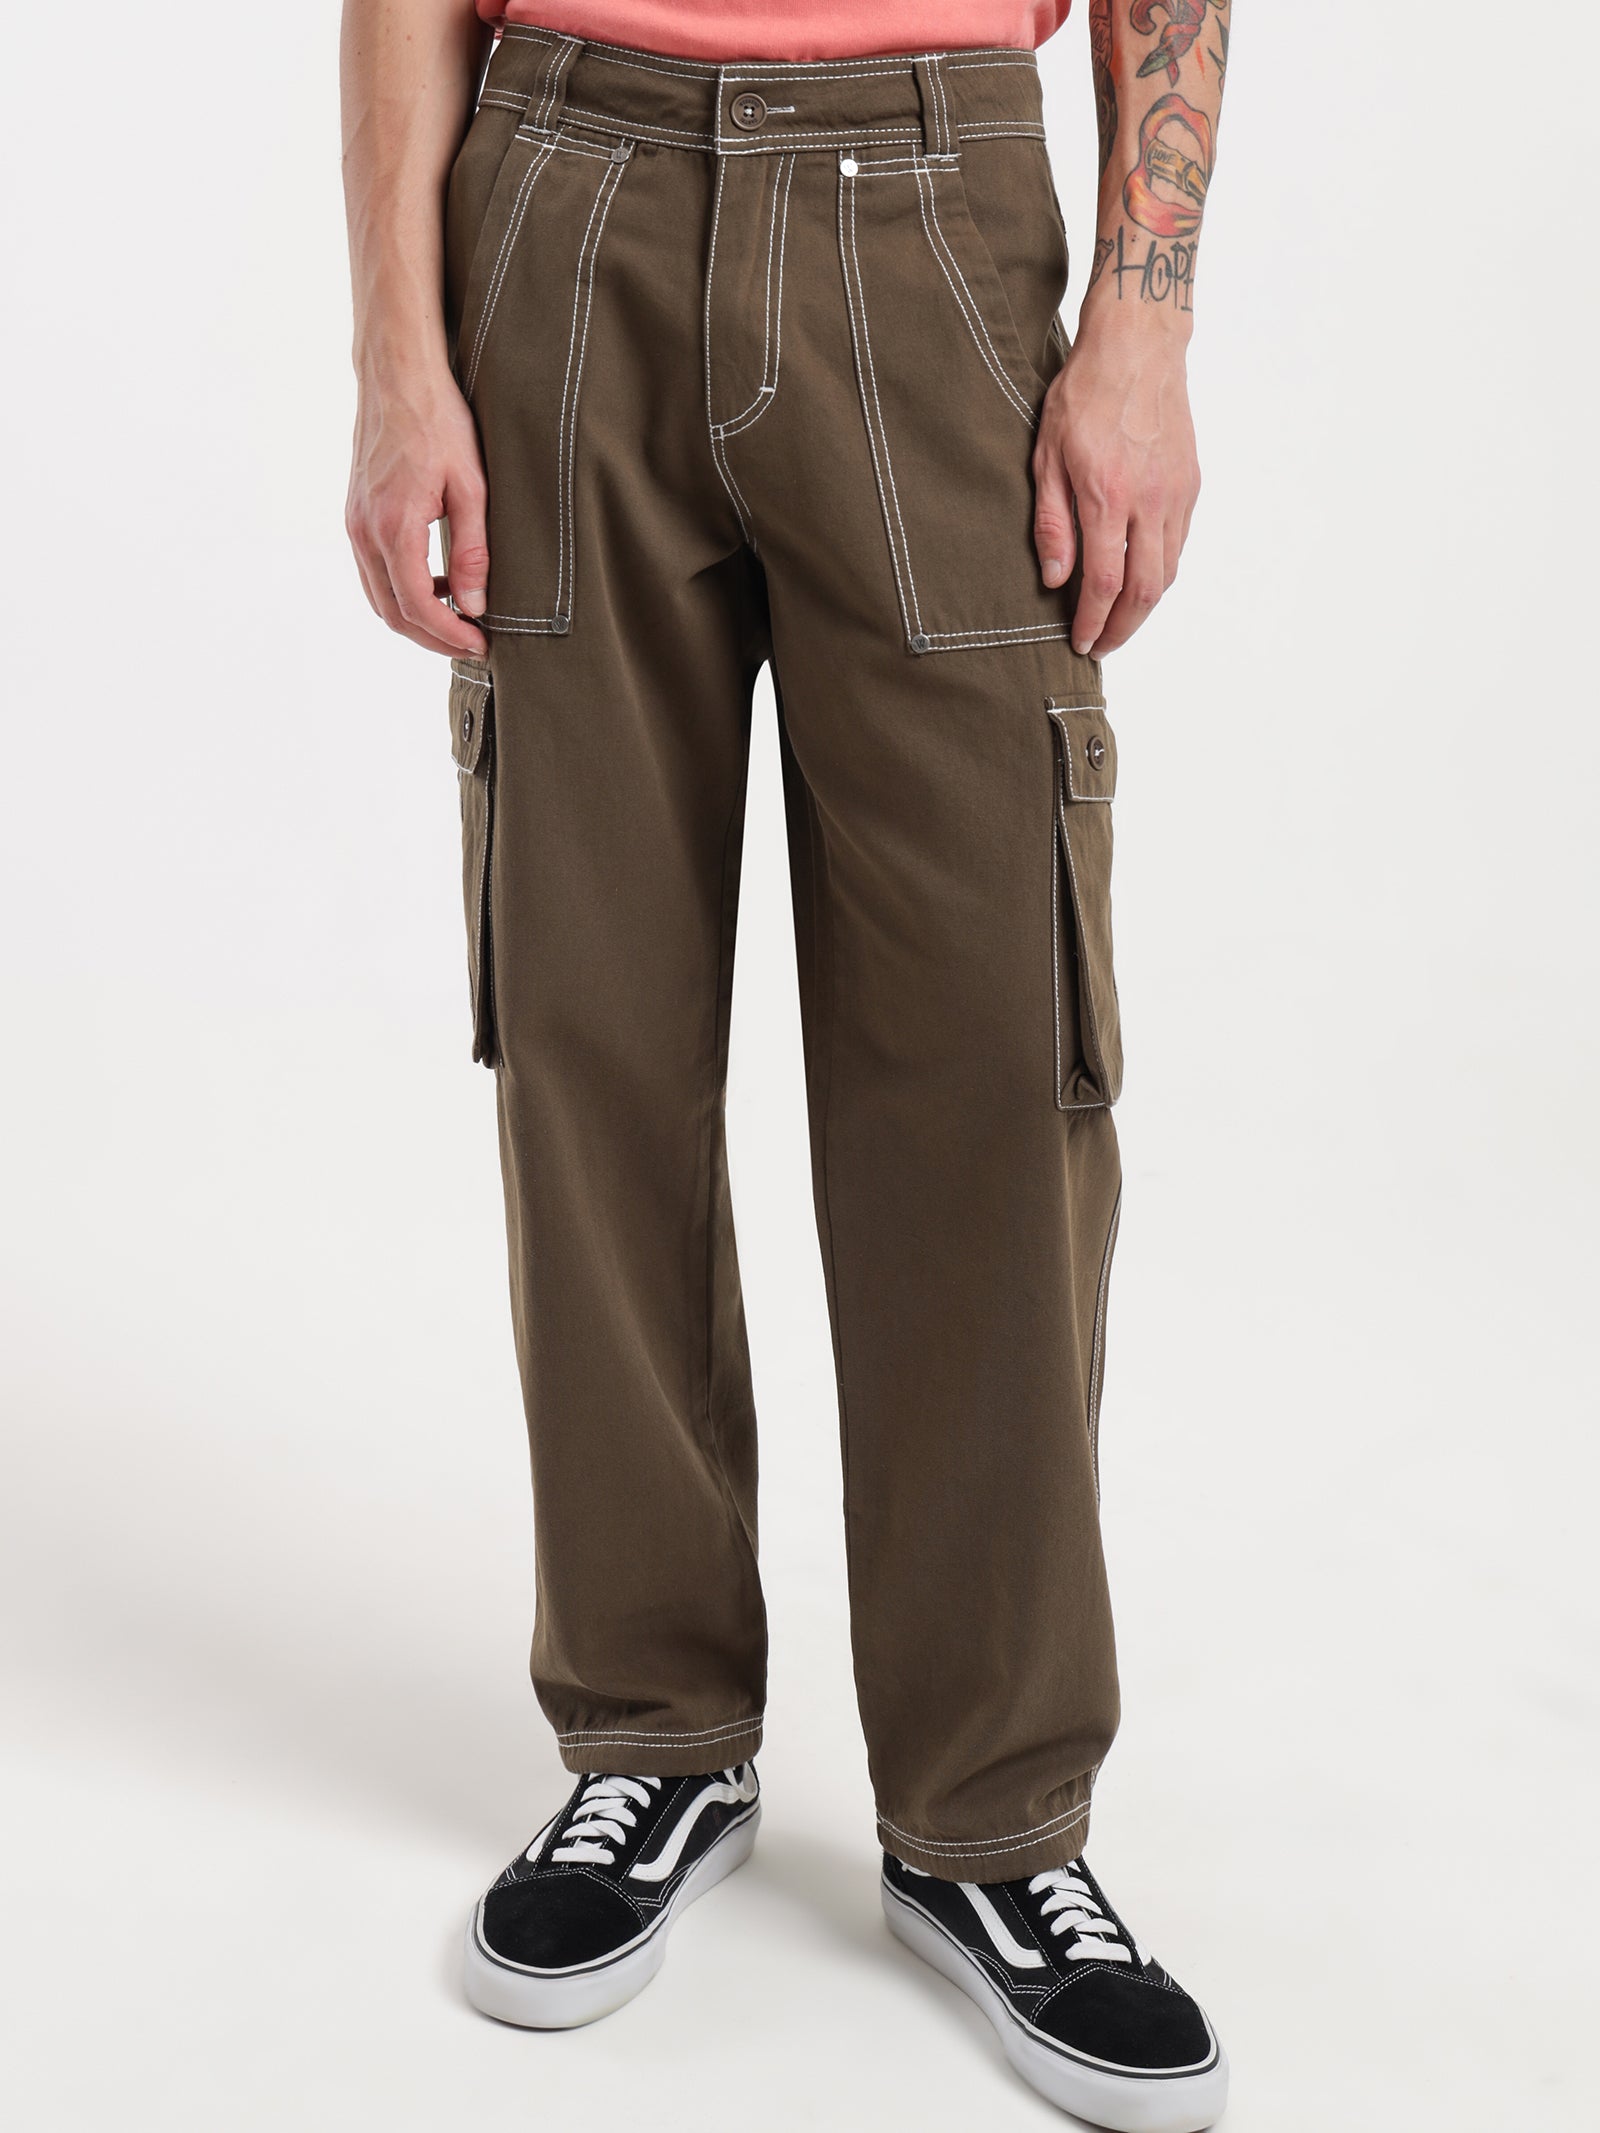 Syndicate Cargo Pants in Chocolate - Glue Store